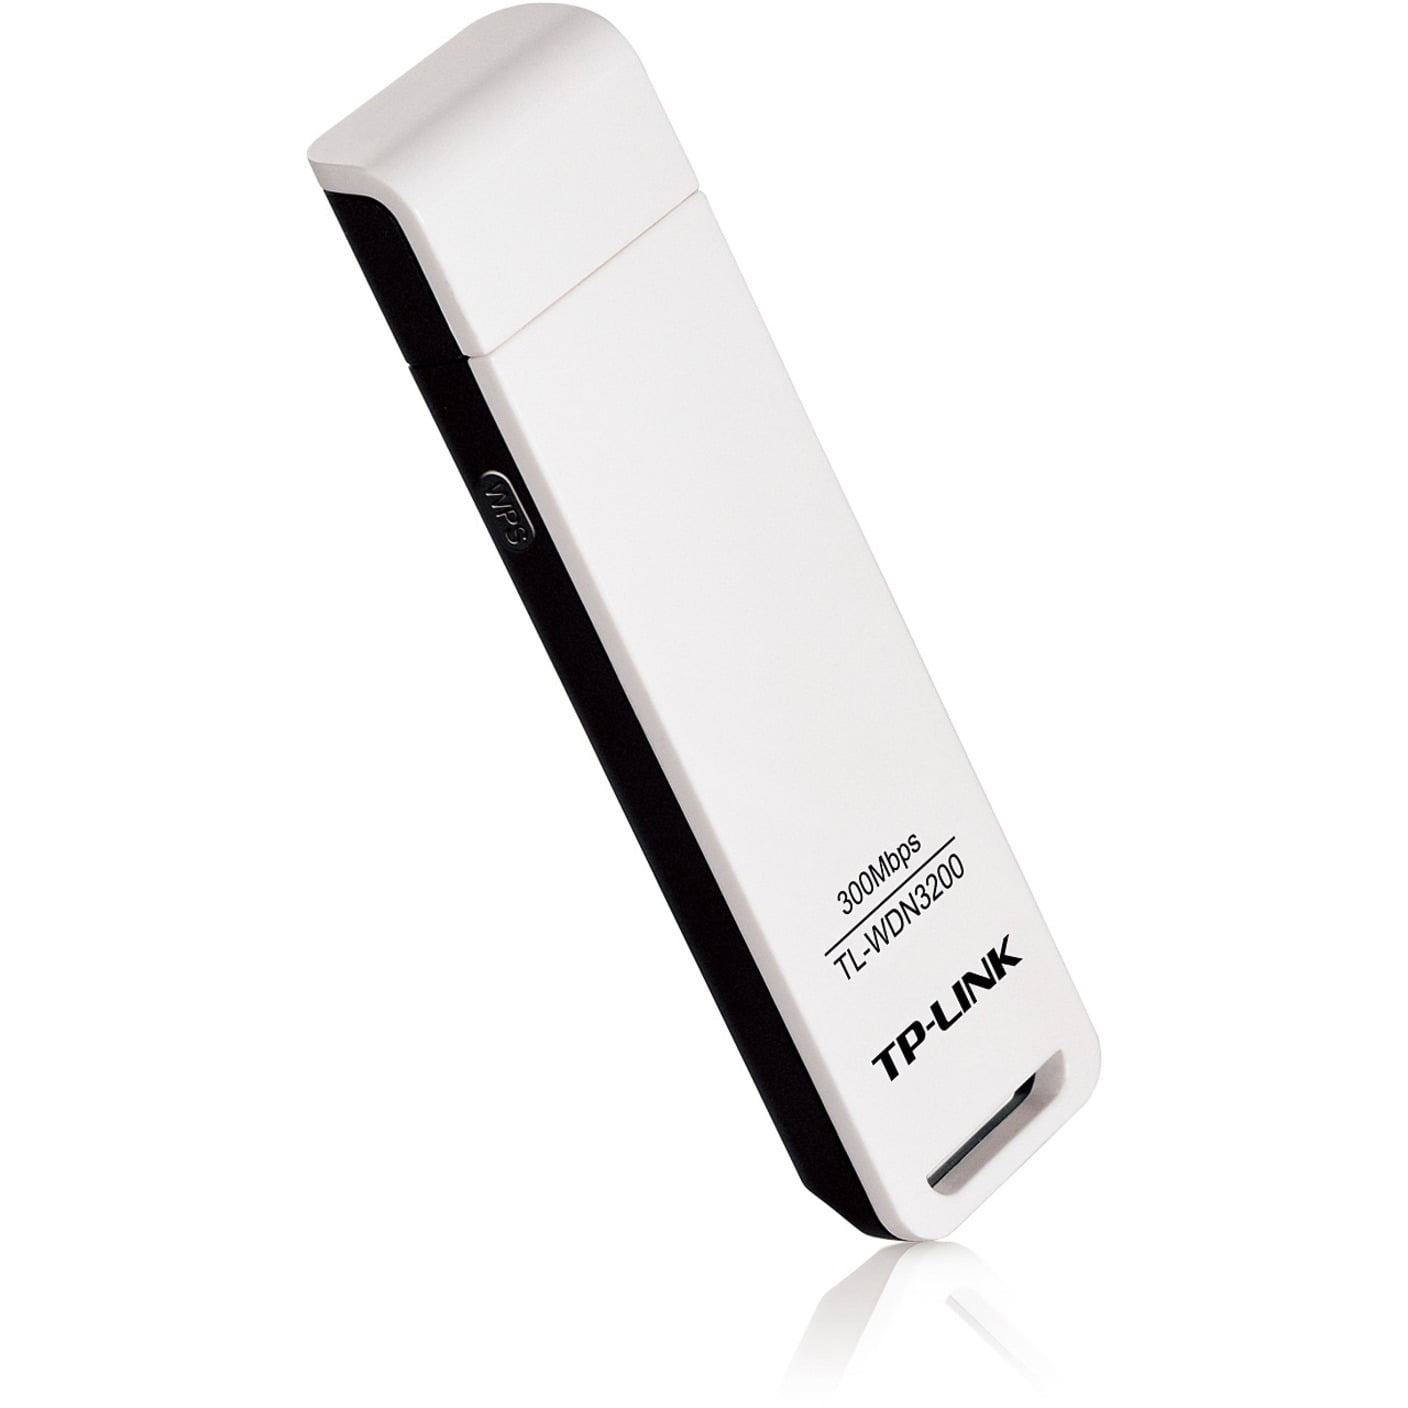 TP-LINK TL-WDN3200 N600 Dual Band Wireless Adapter, 300Mbps/5Ghz 300Mbps, One-Button Setup, Support Windows - Walmart.com